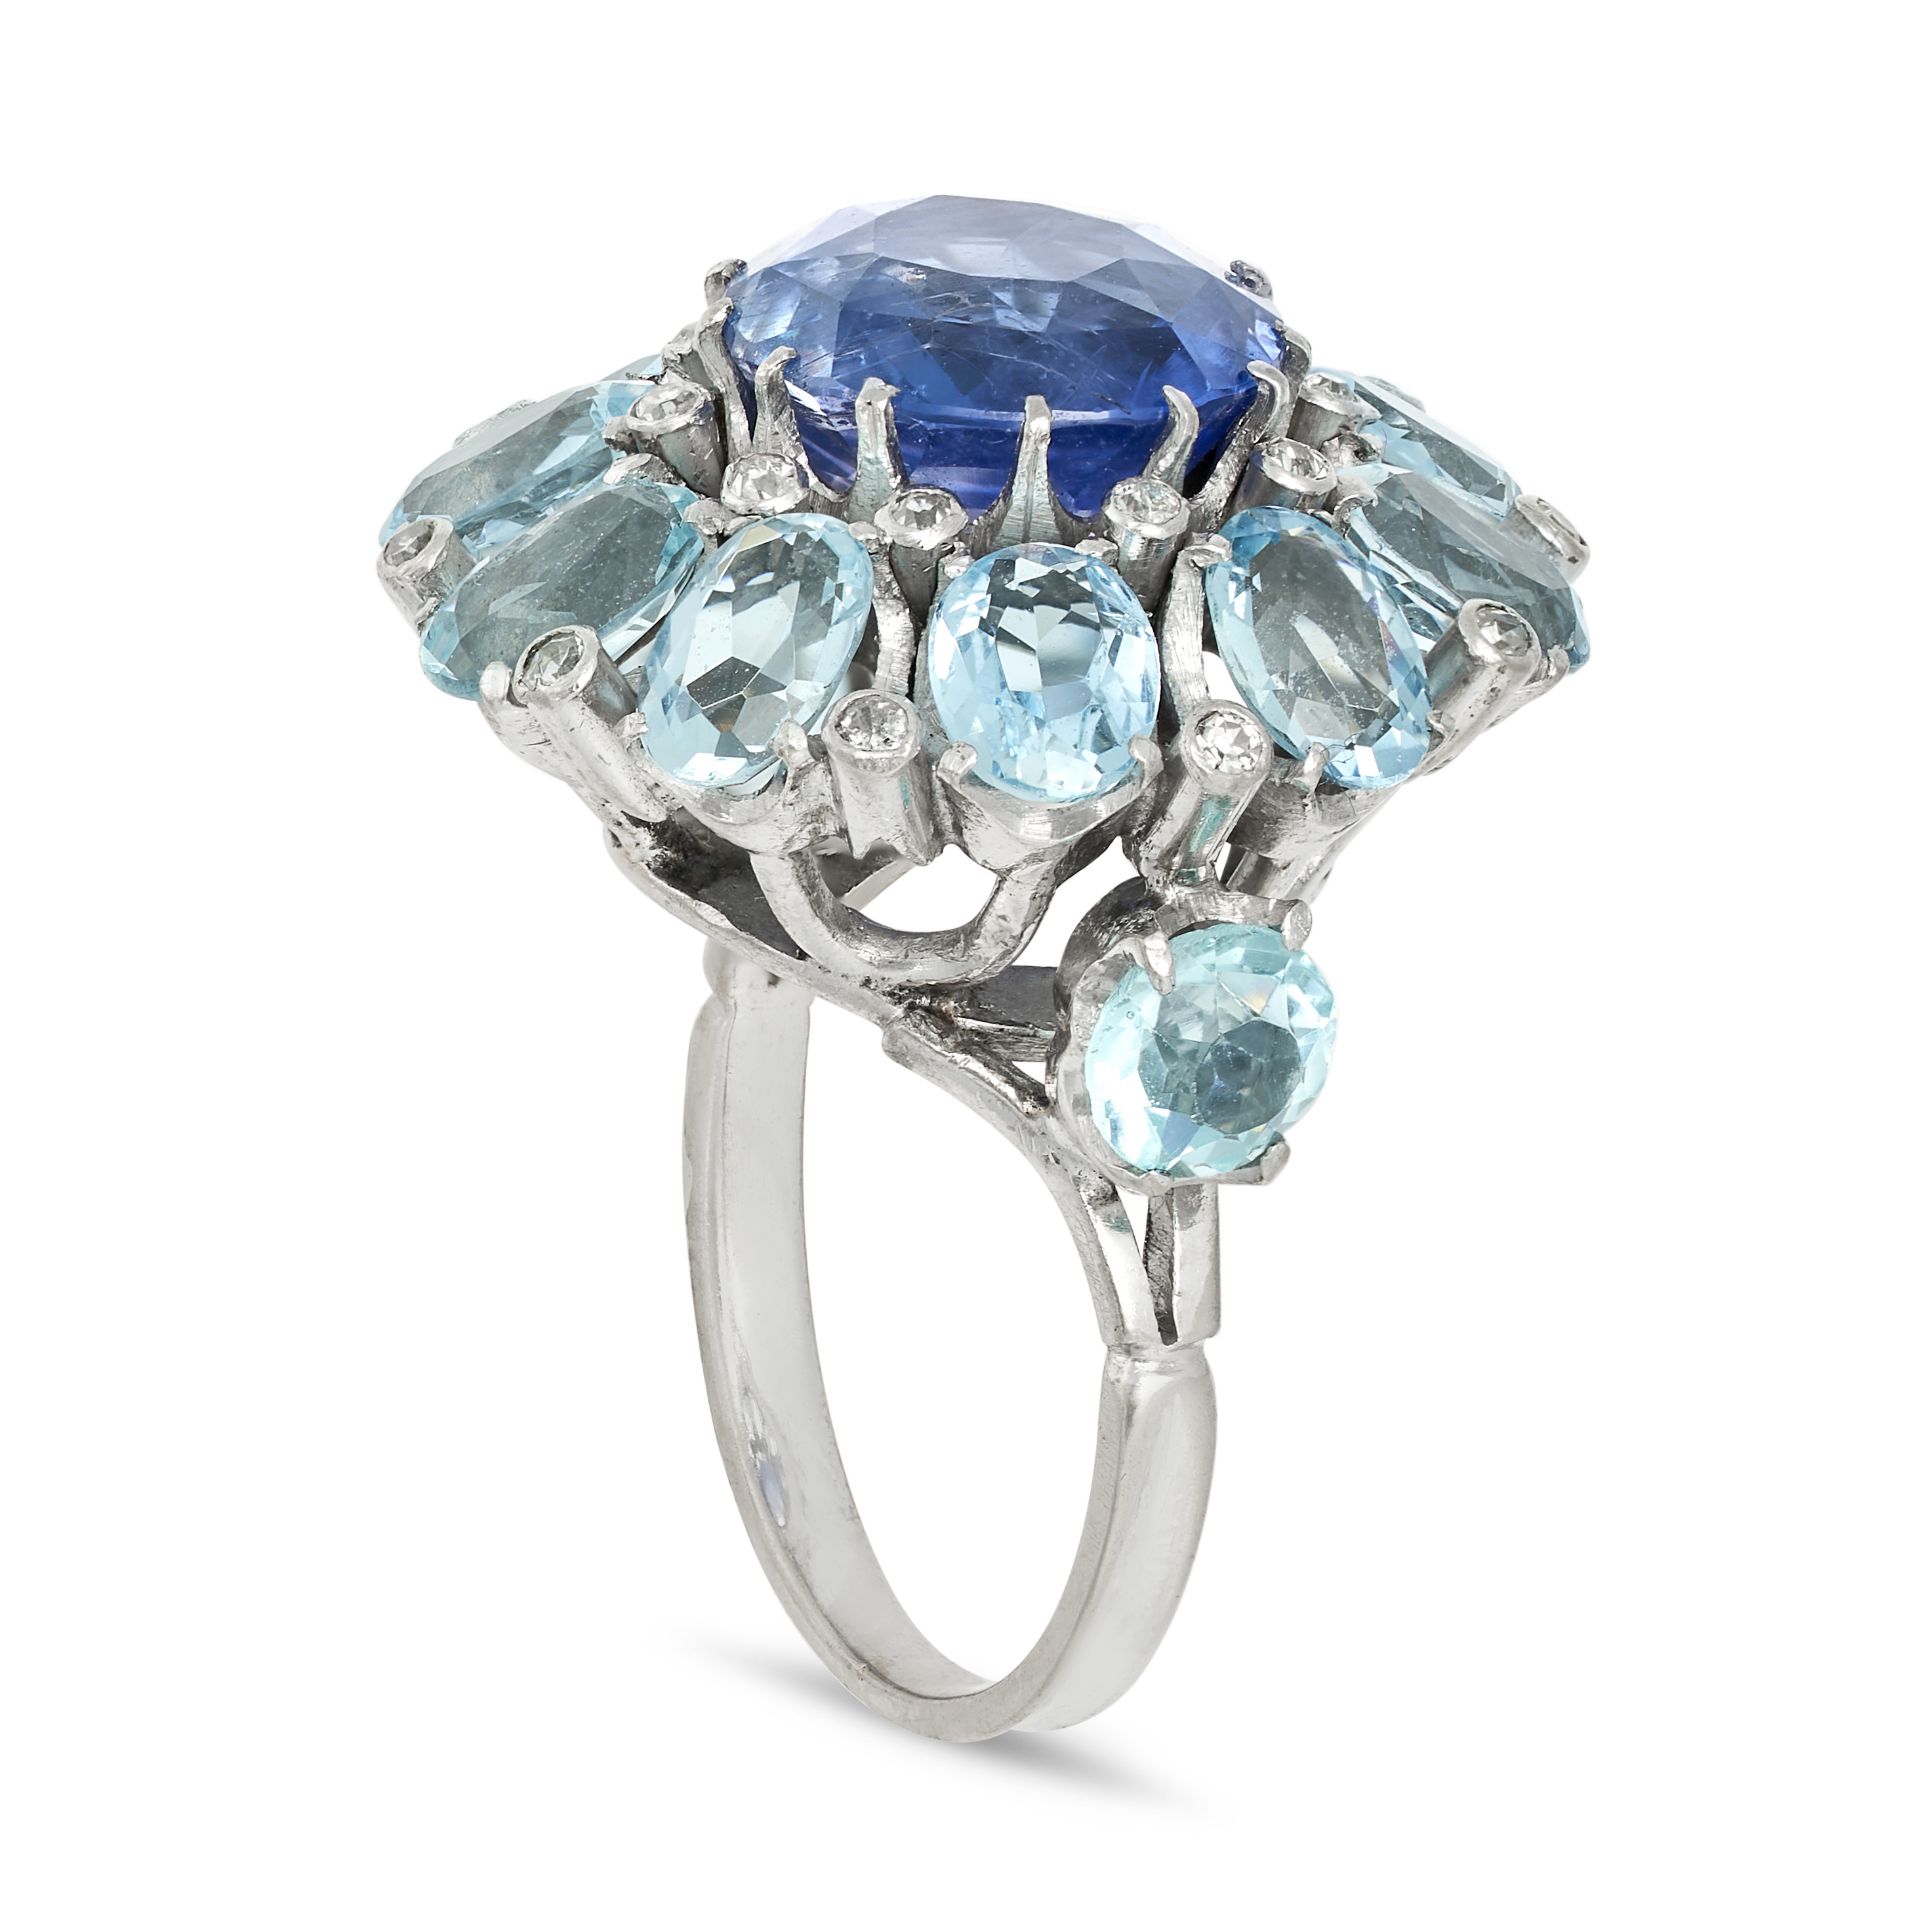 A SAPPHIRE, AQUAMARINE AND DIAMOND COCKTAIL RING in white gold, set with a round cut sapphire of ... - Image 2 of 2